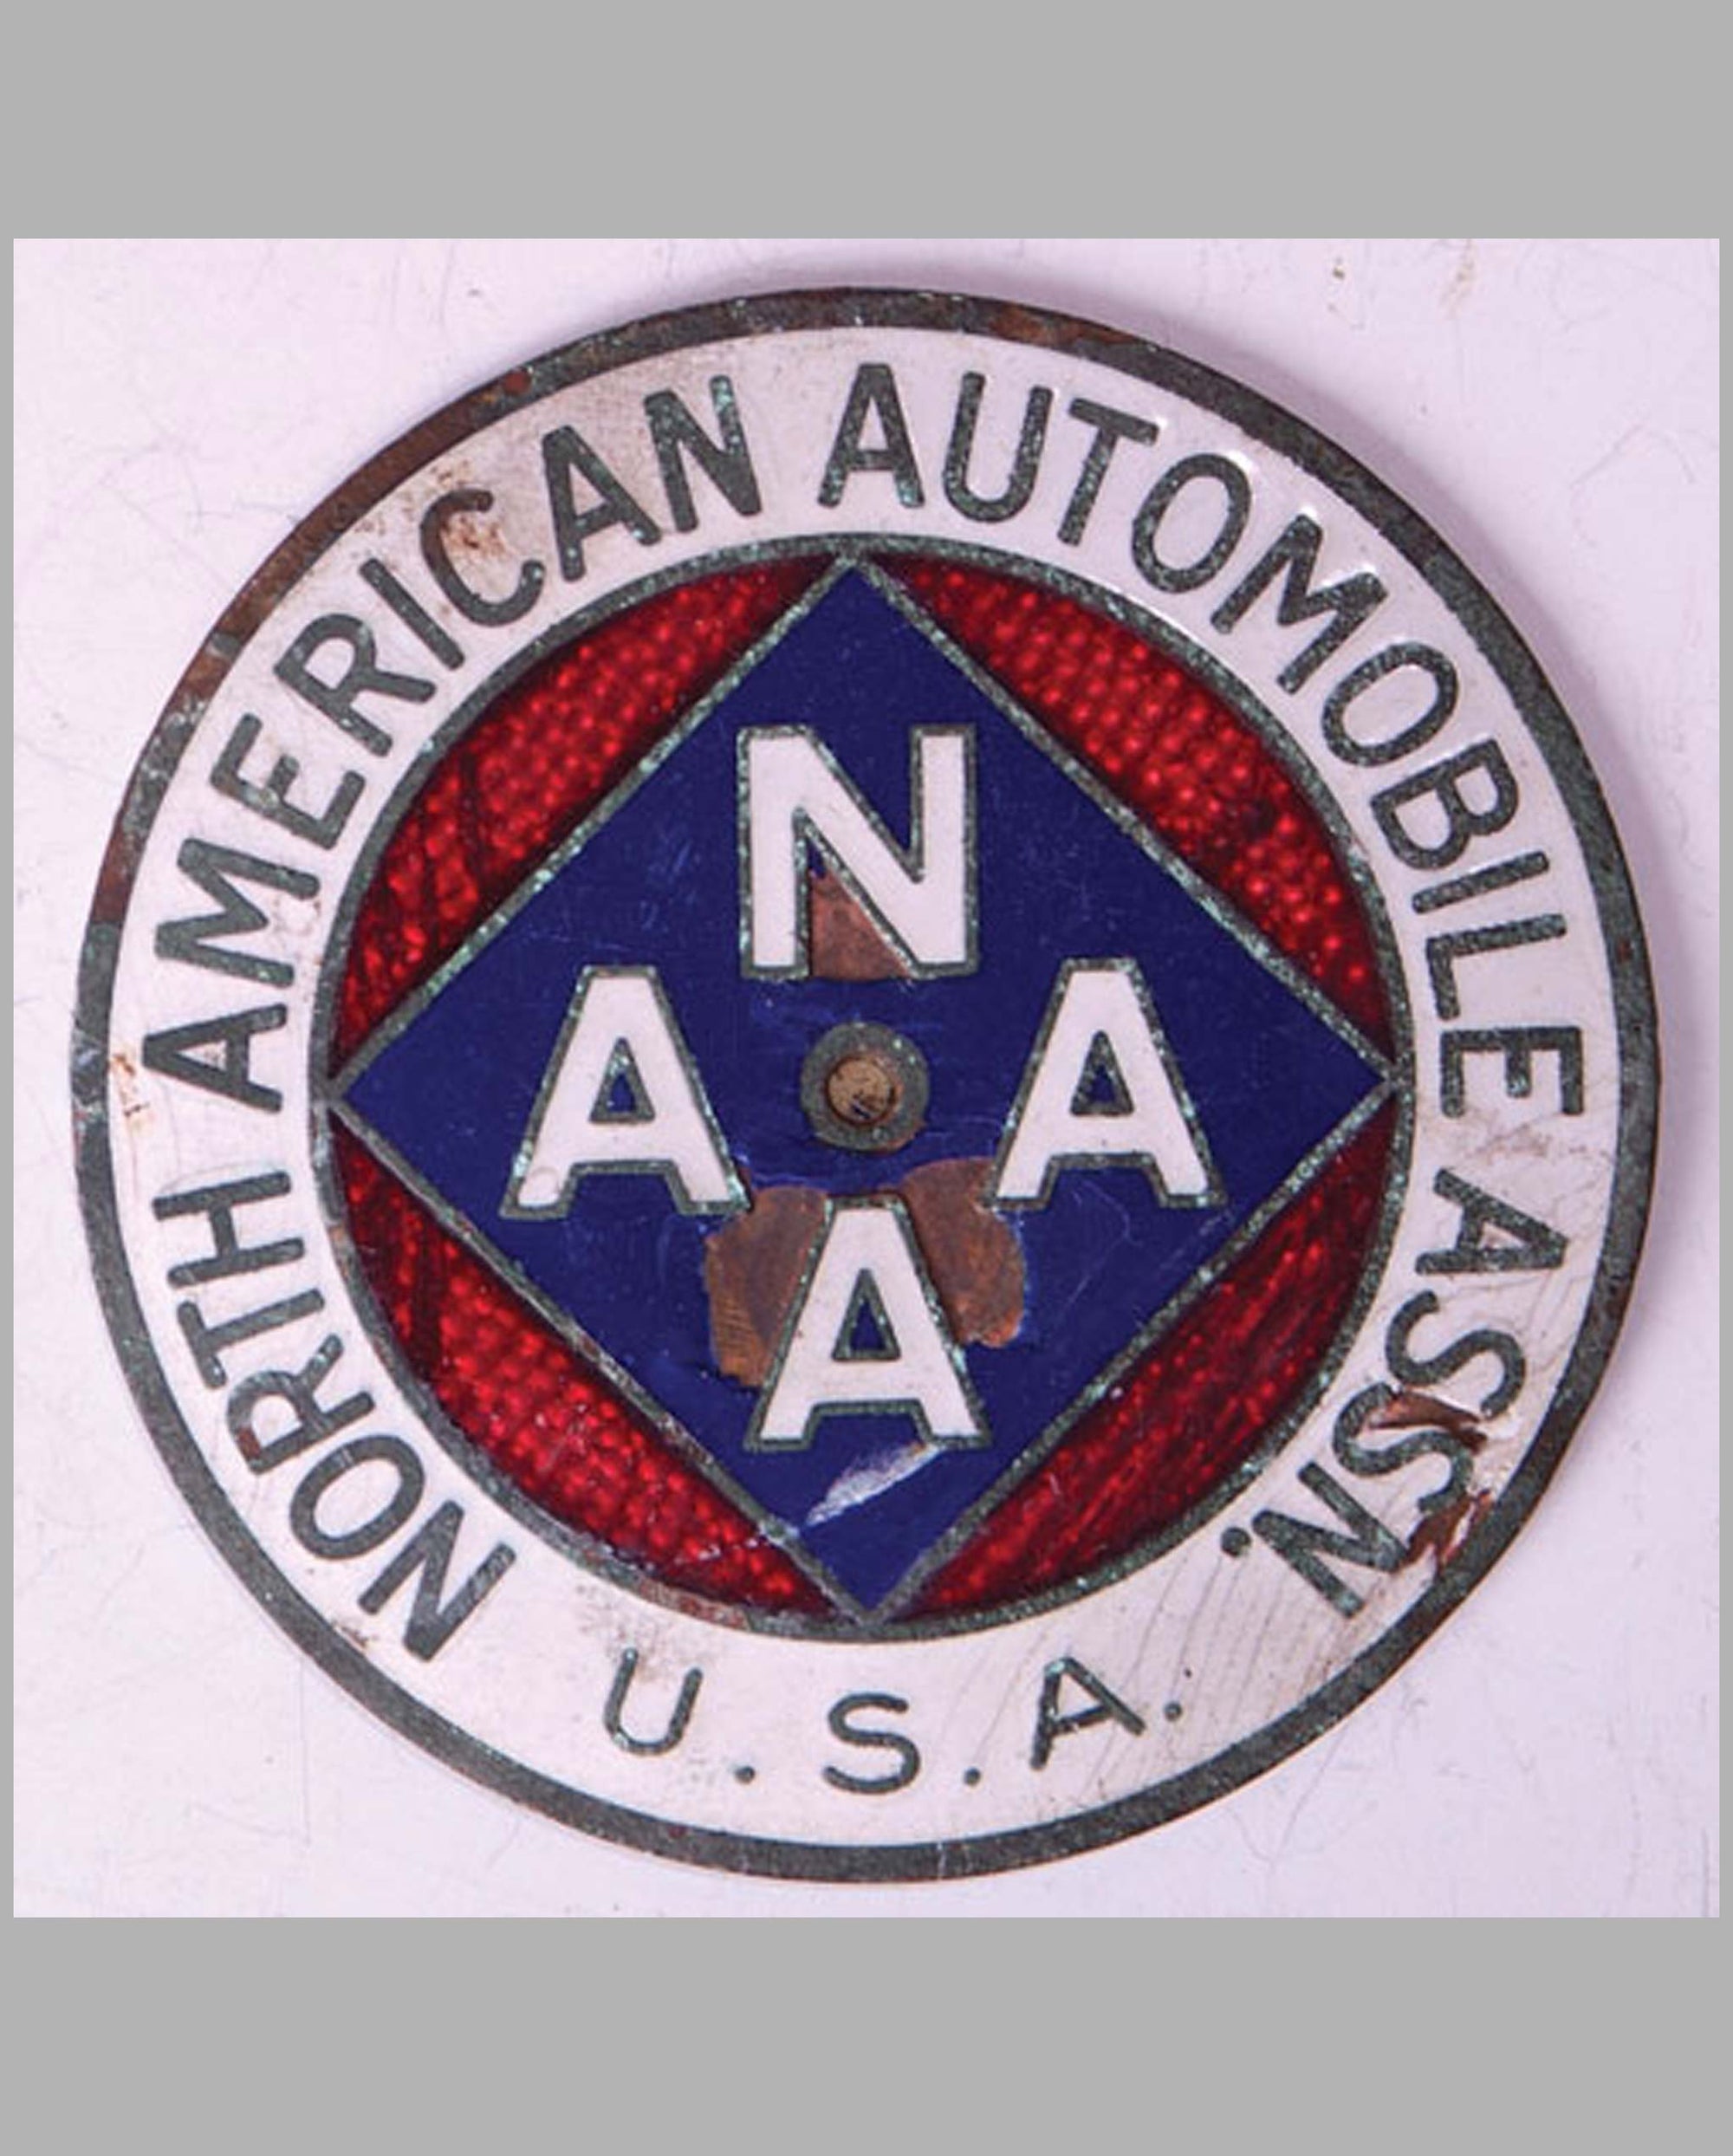 North American Automobile Assn member's badge